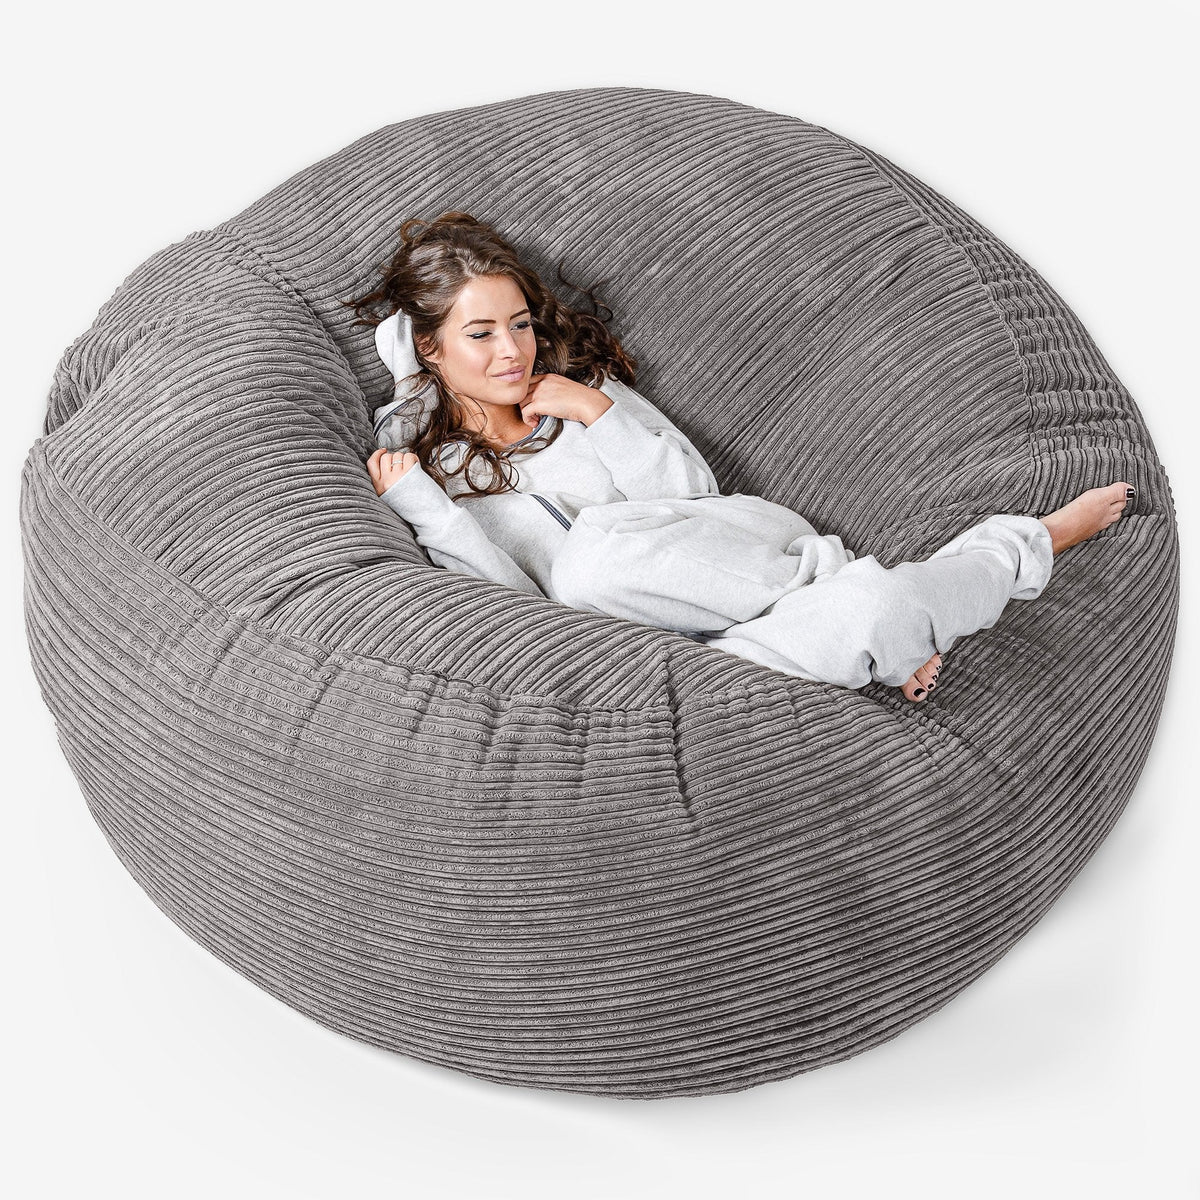 3 Sizes Large Bean Bag Sofa Cover with Pockets Lounger Chair Sofa Living  Room Furniture Beanbag Bed for Adults Kids Just Cover No Filling -  Walmart.com